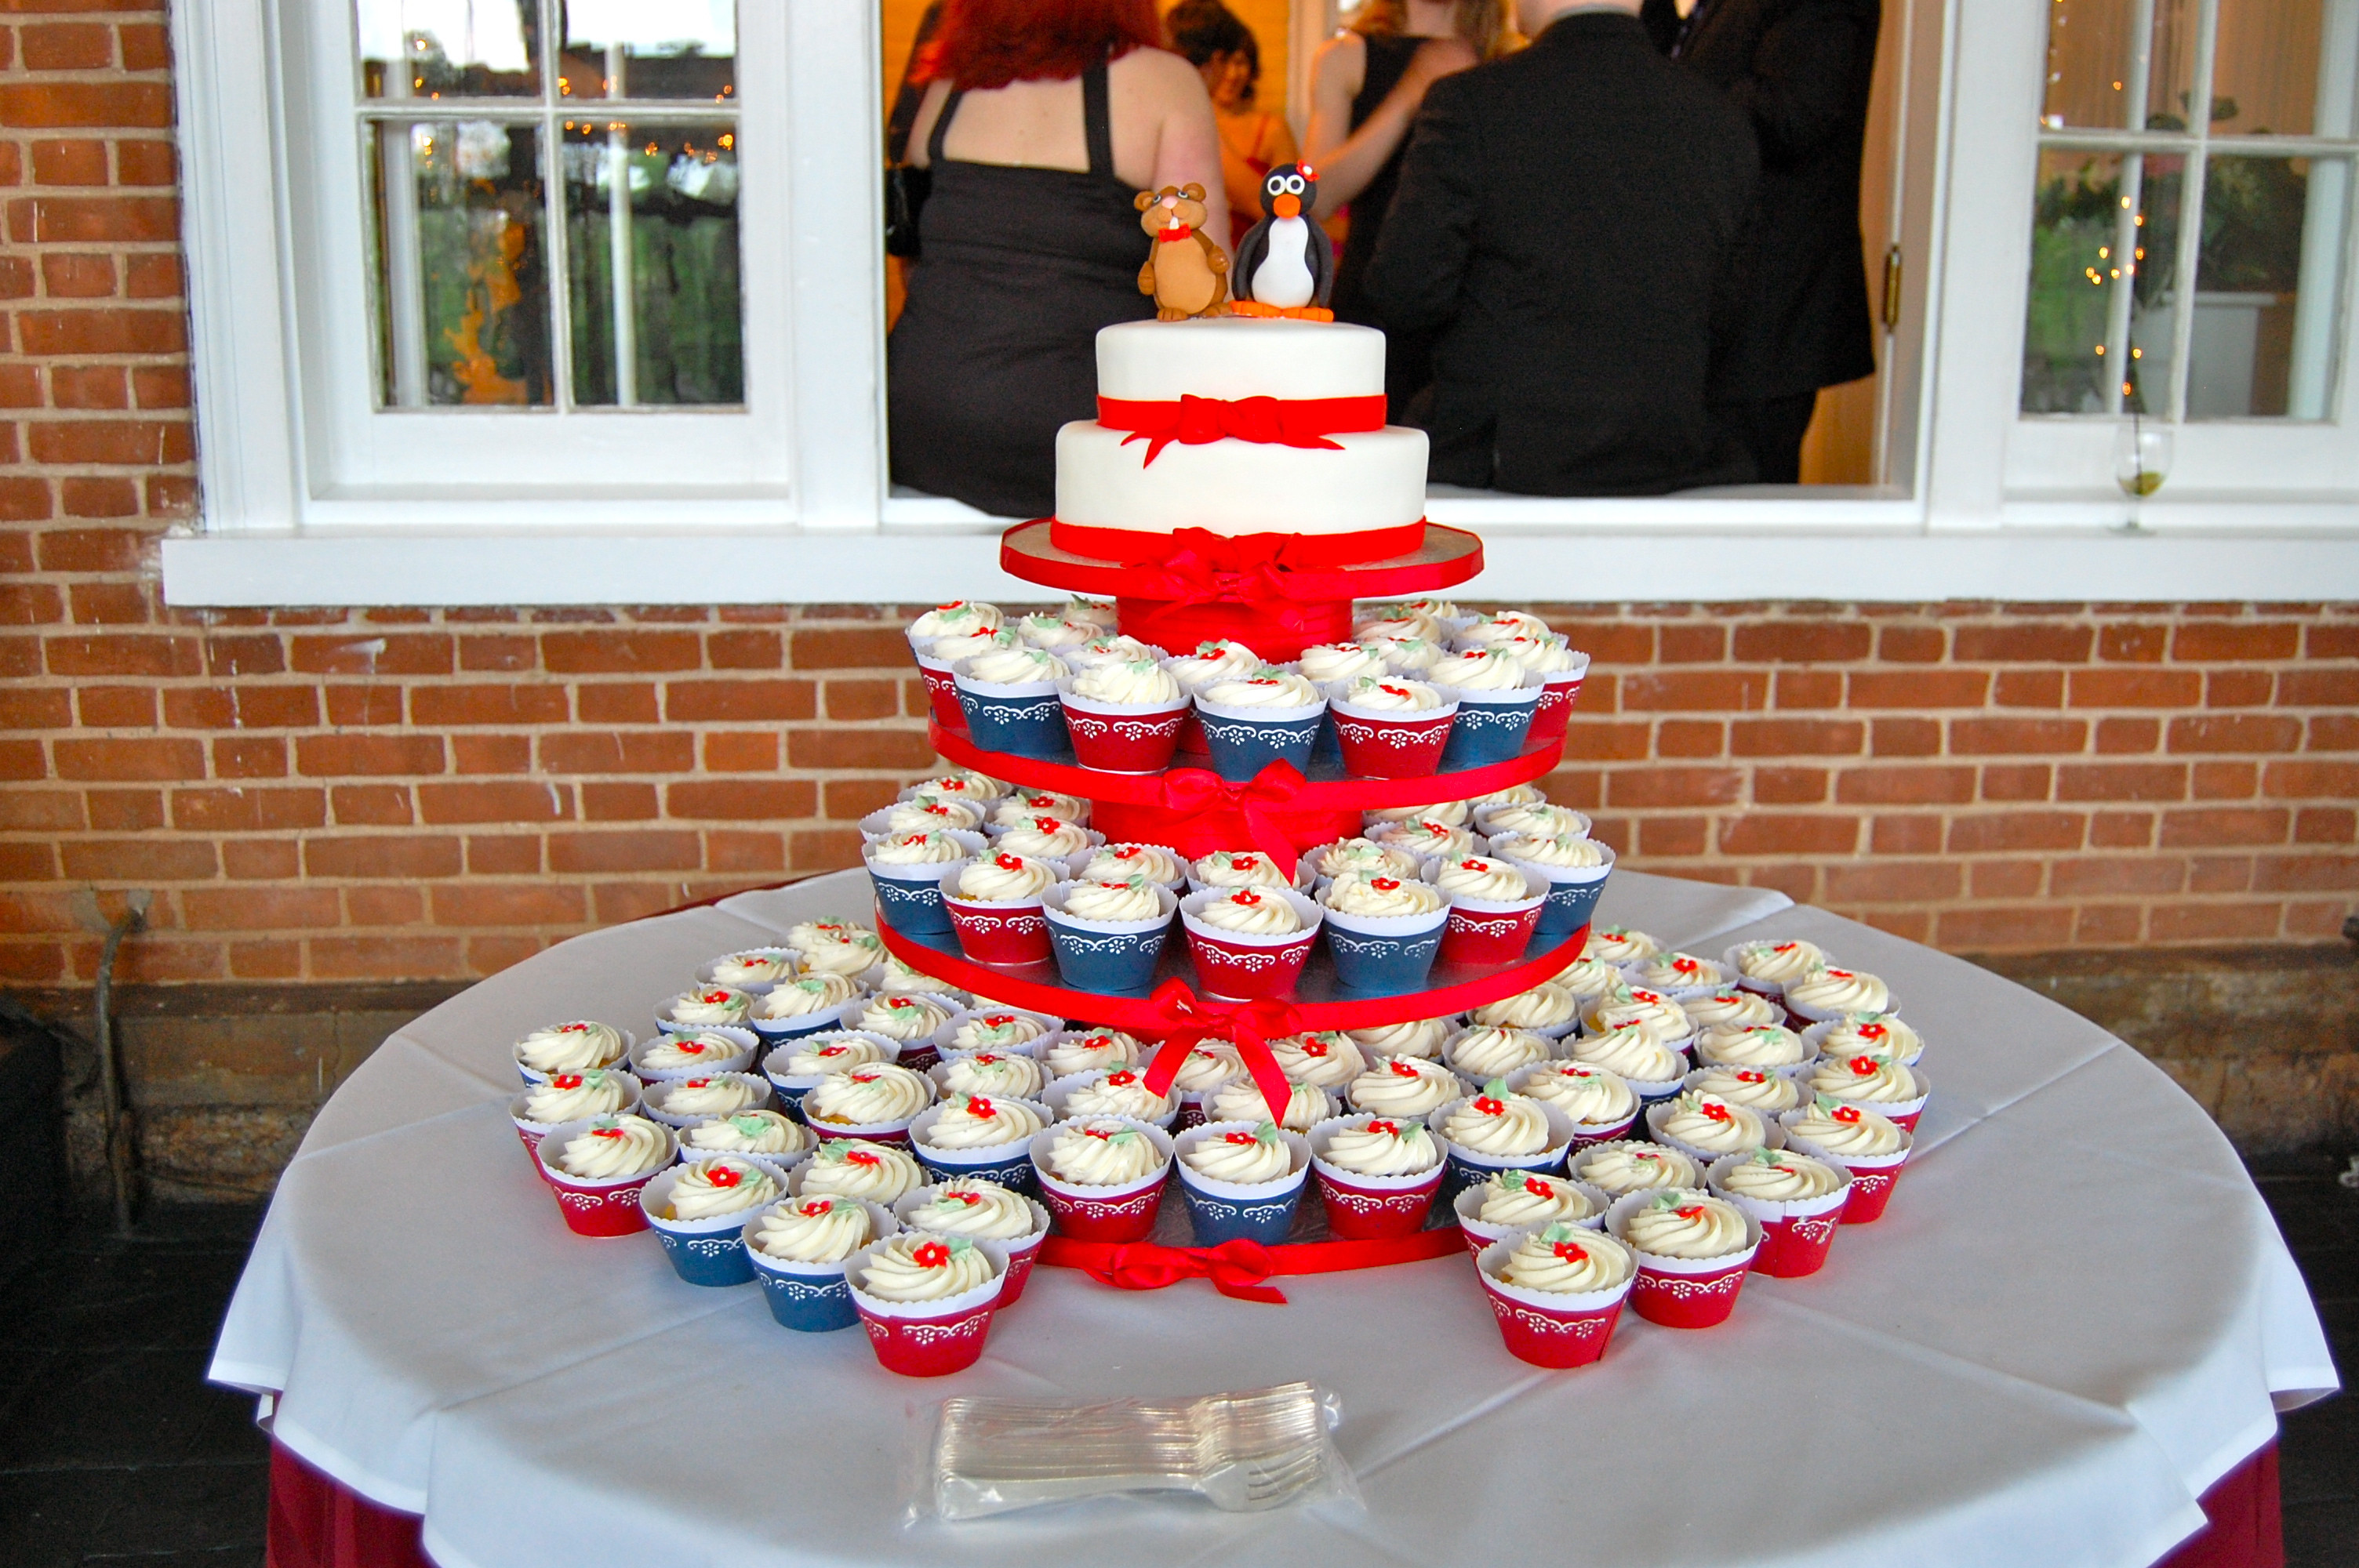 Red White And Blue Wedding Cakes
 The Bridal Cake Red White And Blue Wedding Cakes